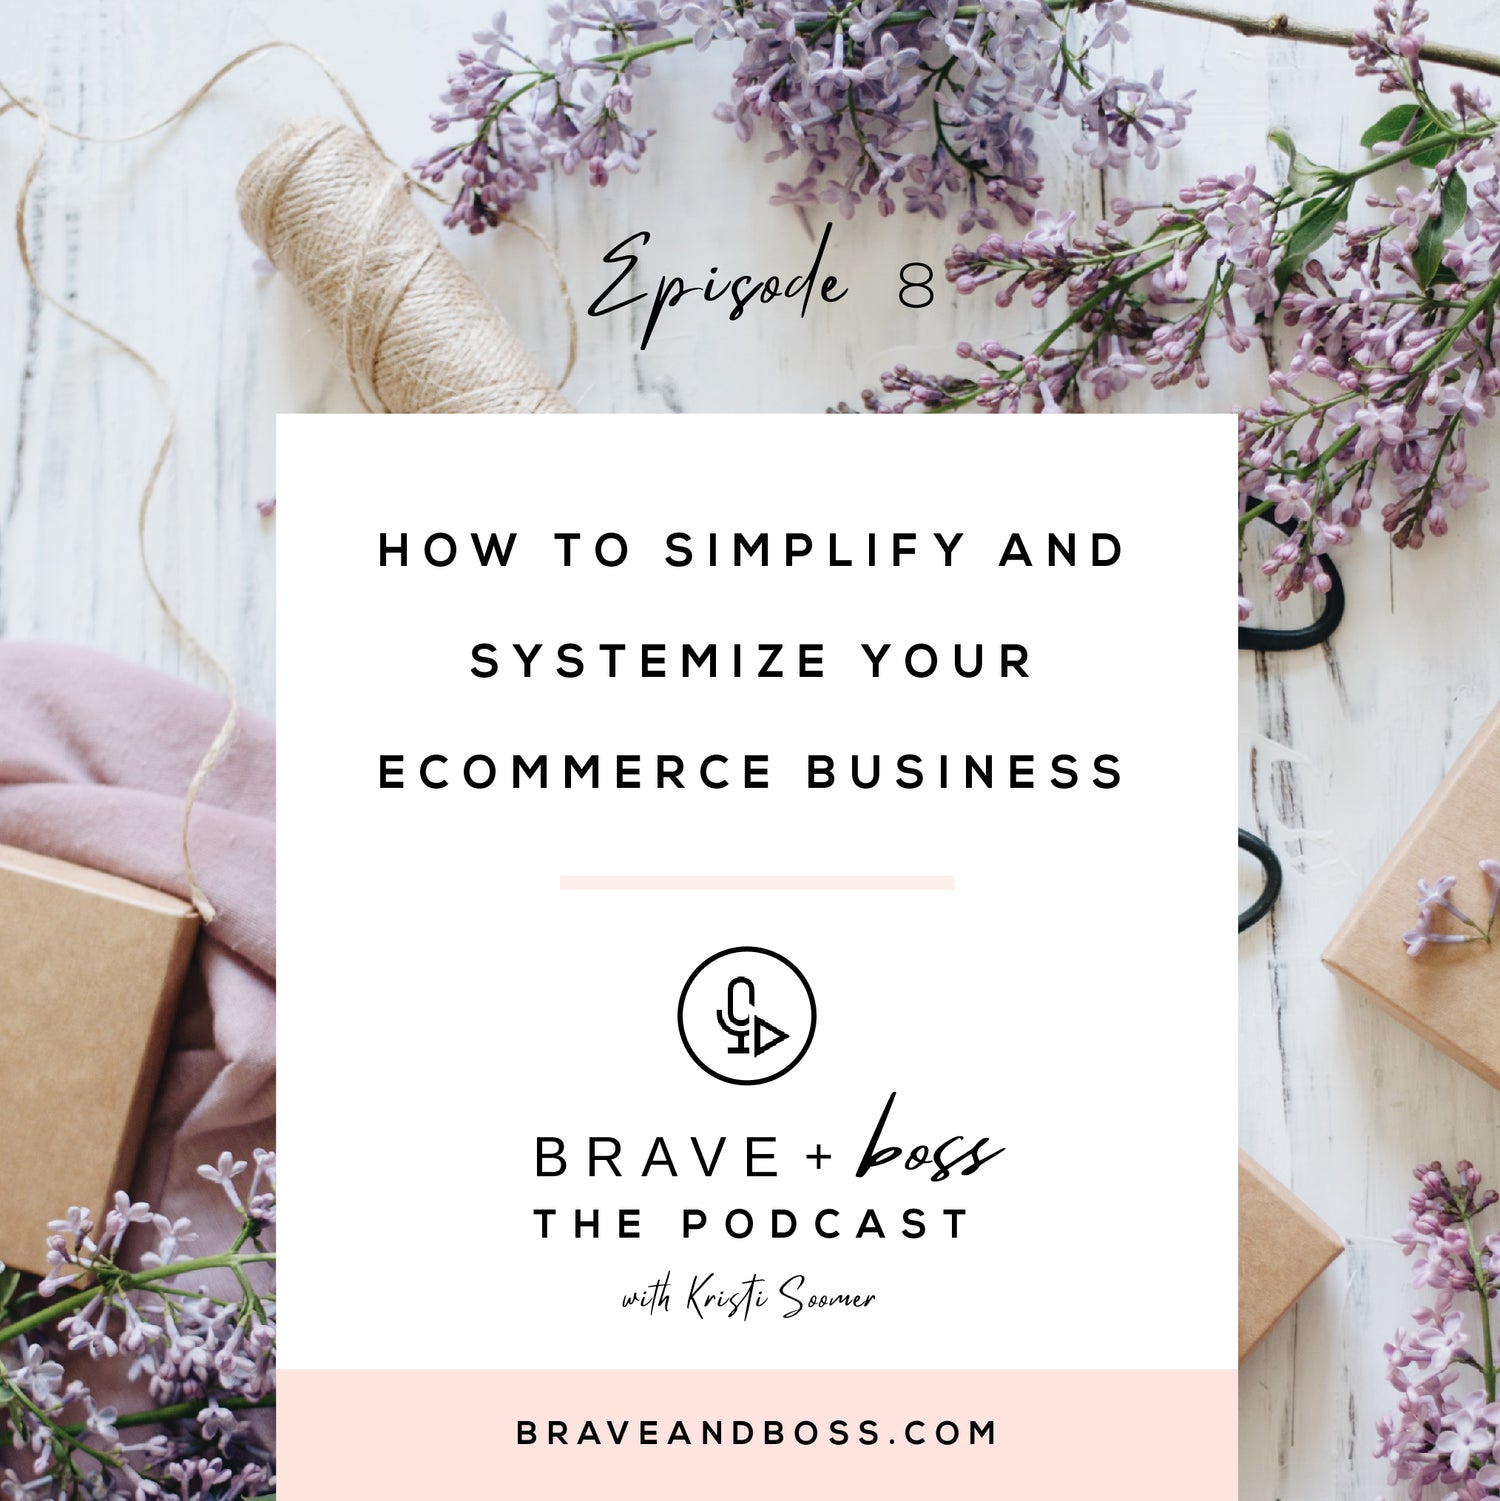 How to Simplify and Systemize your eCommerce Business